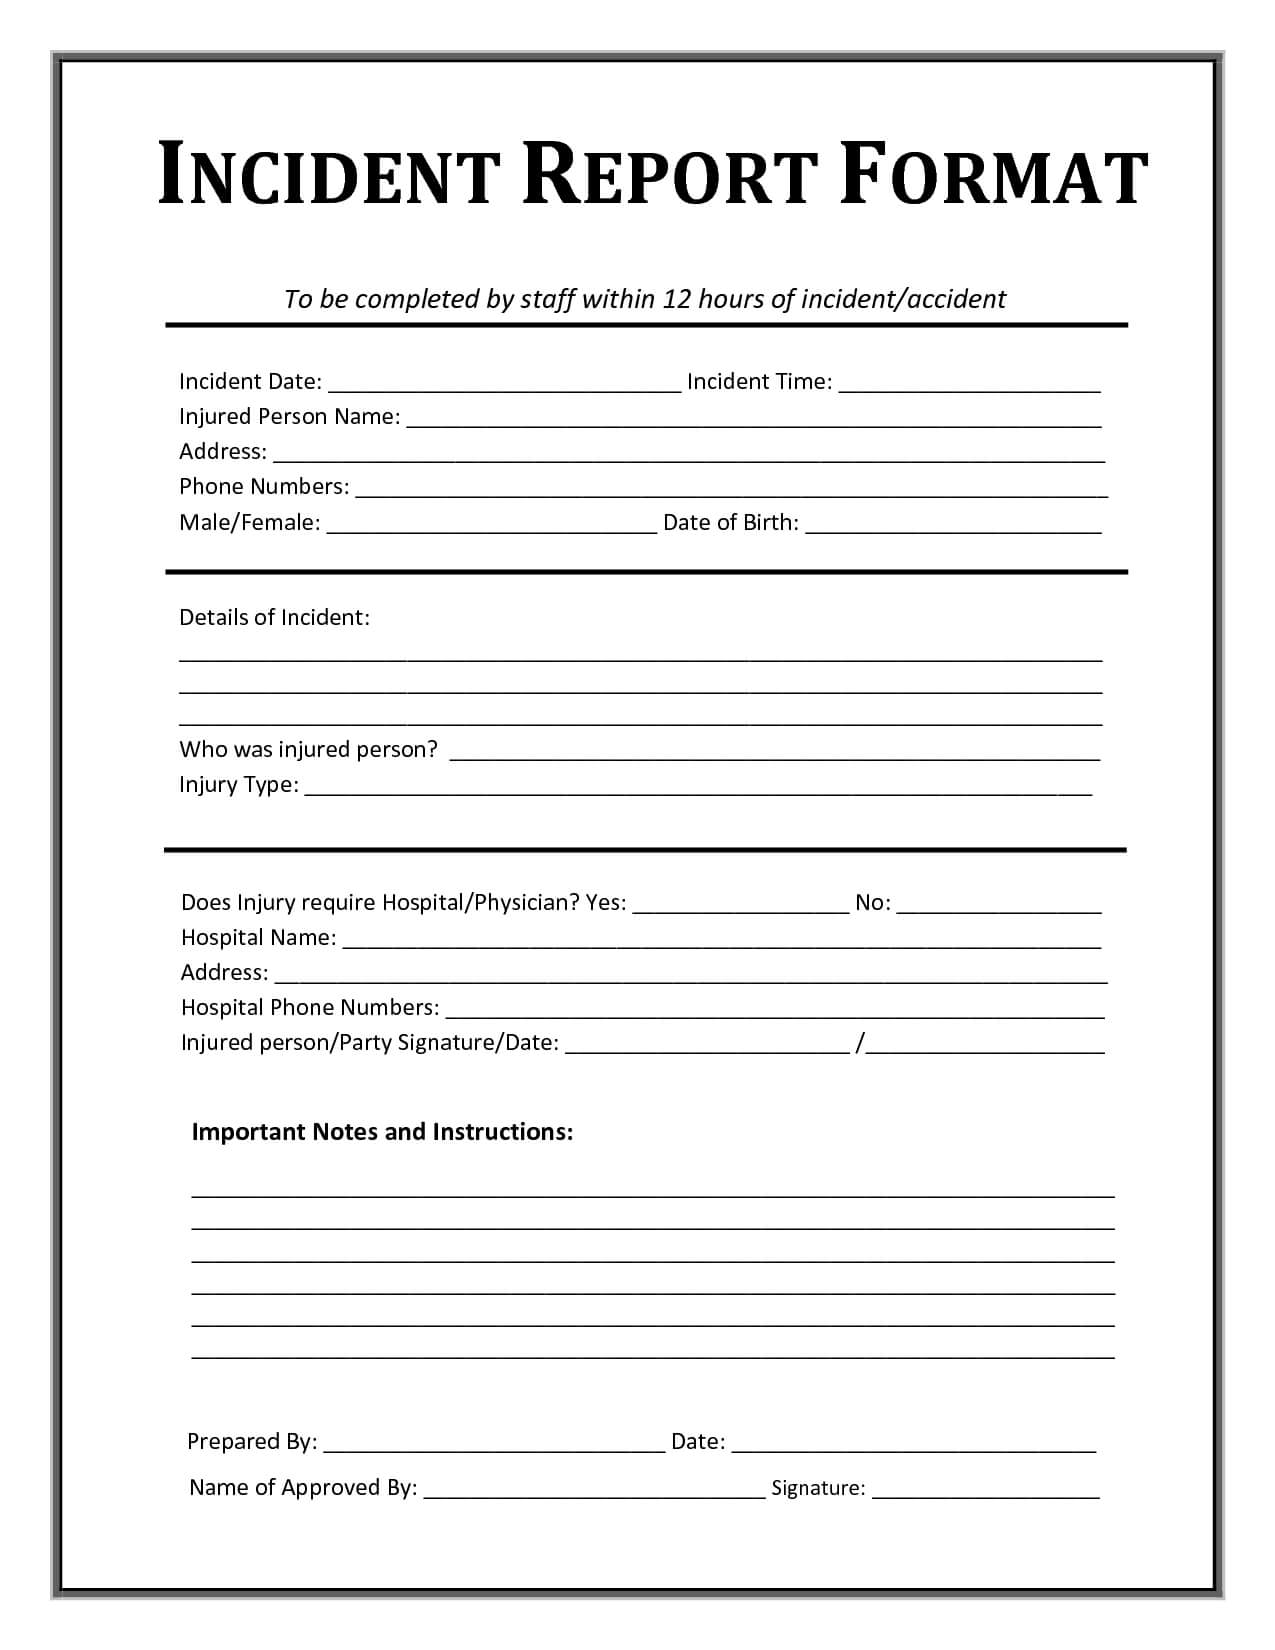 Incident Report Template | Incident Report Form, Incident With Incident Report Register Template